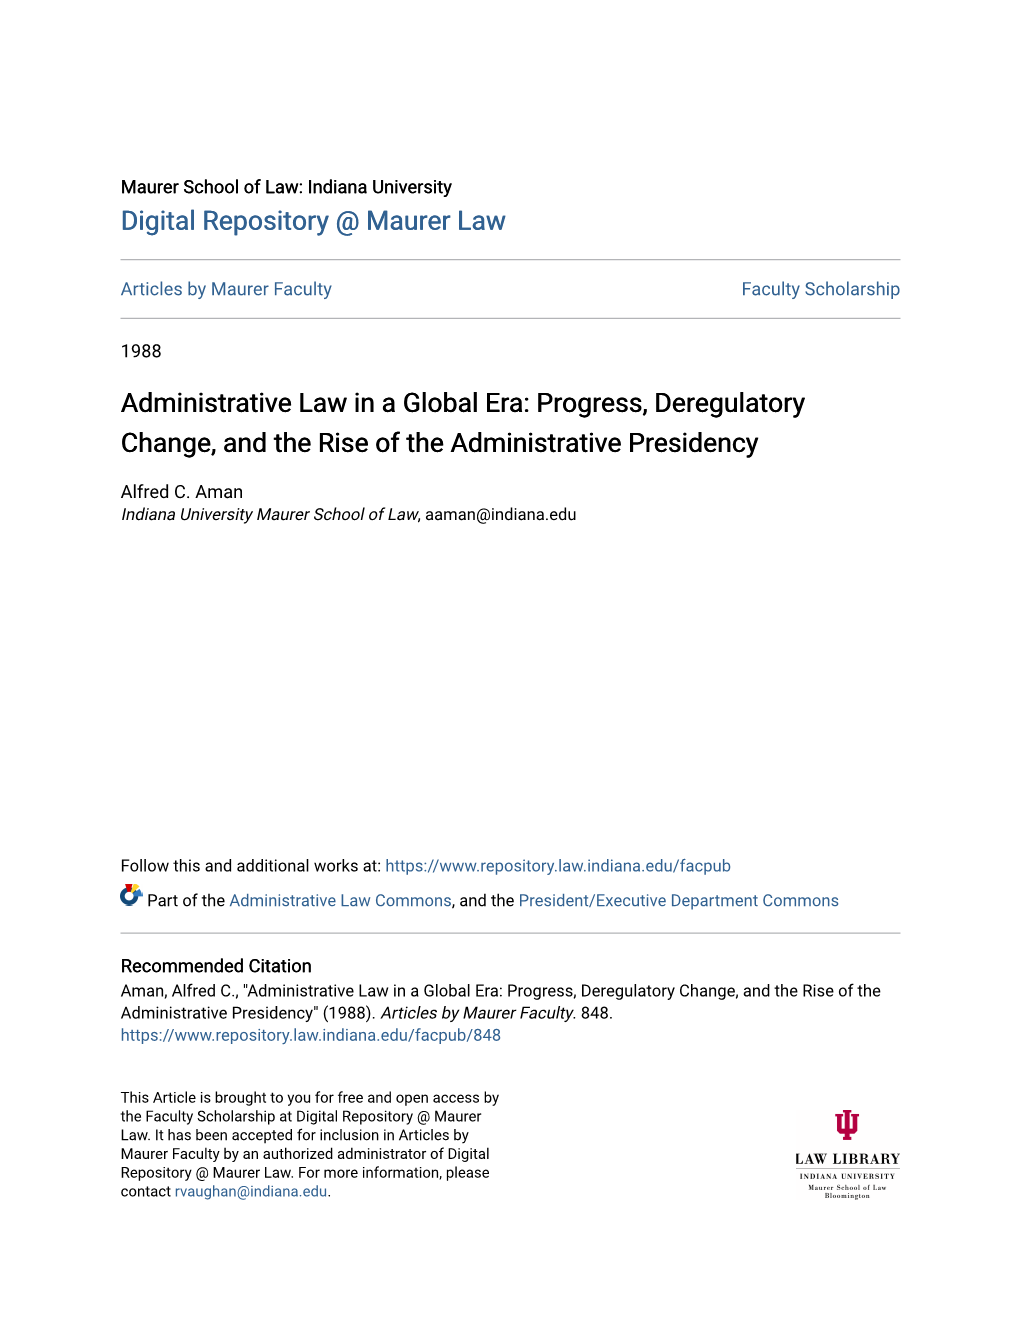 Administrative Law in a Global Era: Progress, Deregulatory Change, and the Rise of the Administrative Presidency